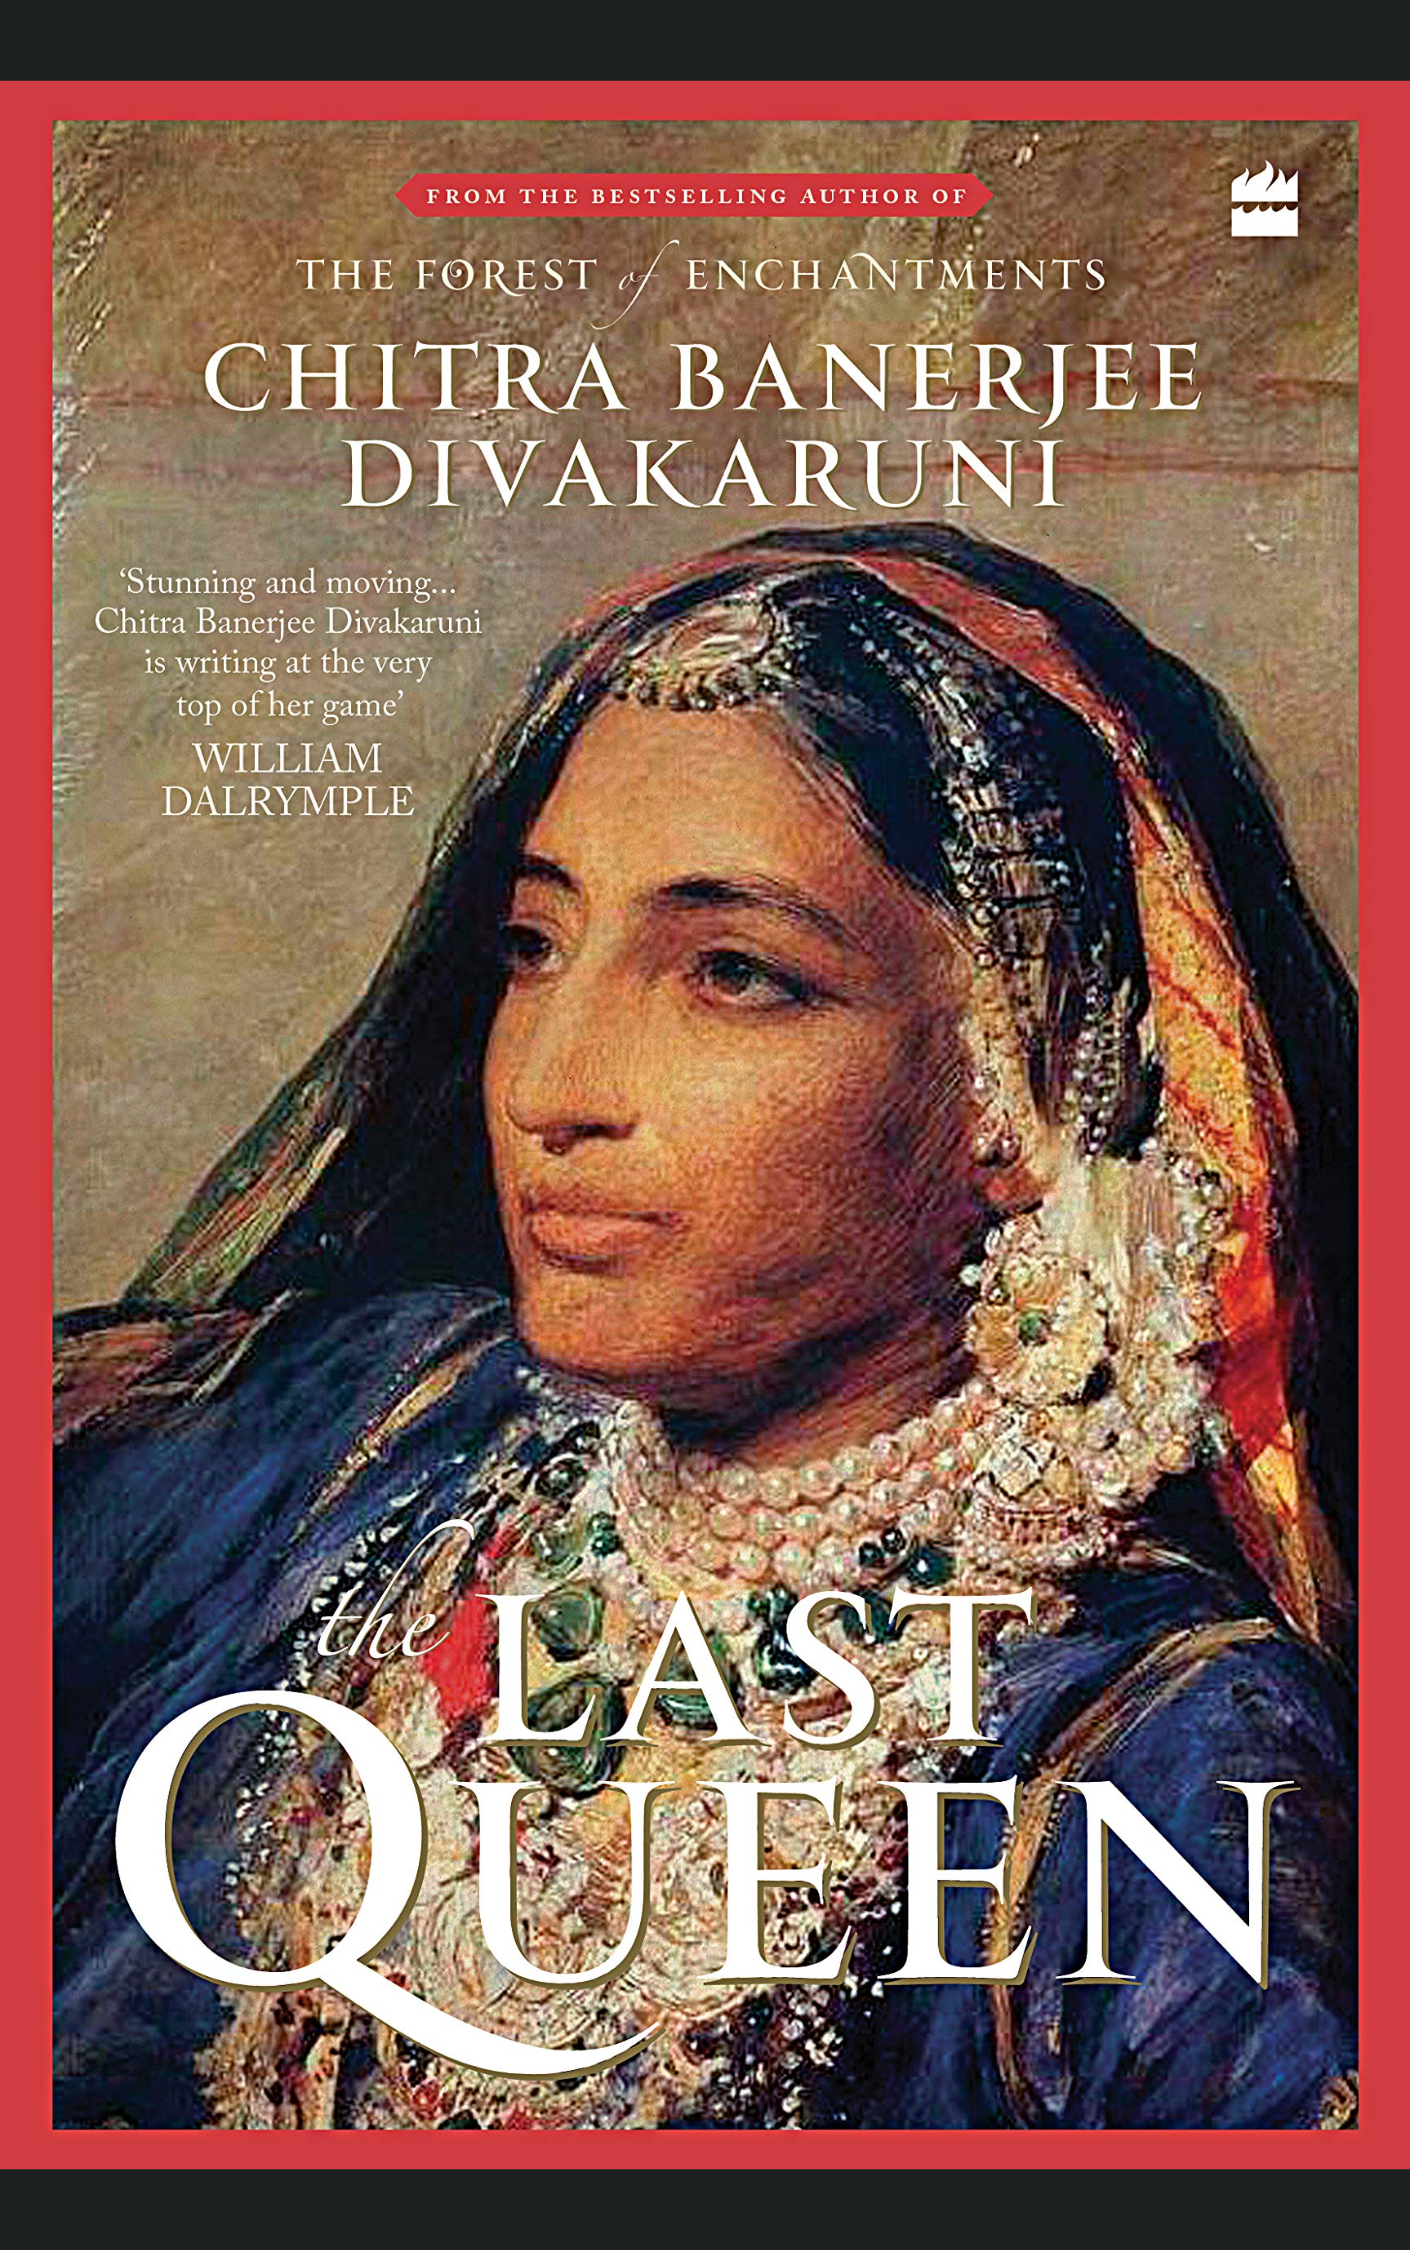 THE LAST QUEEN by CHITRA BANERJEE DIVAKARUNI